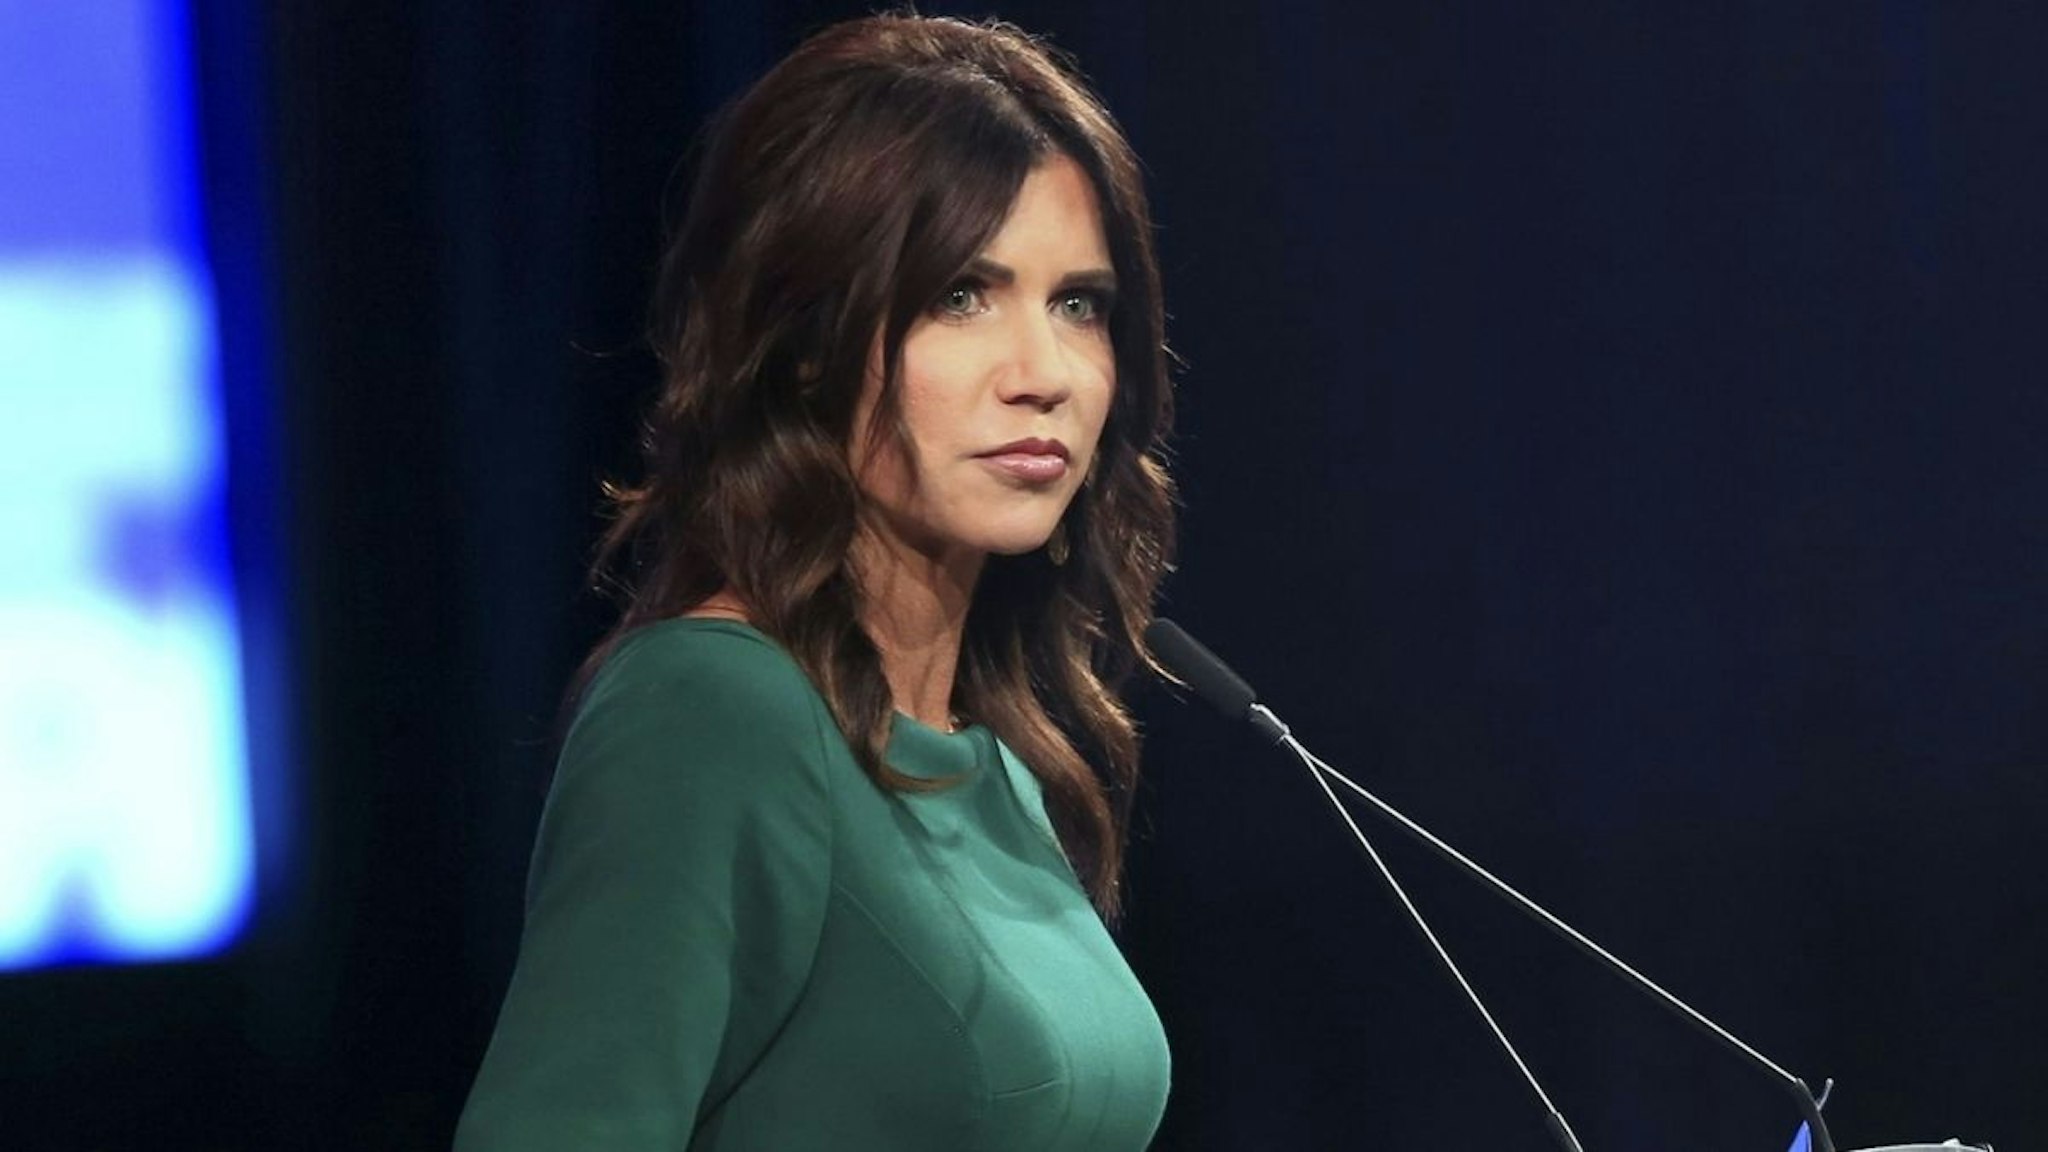 Kristi Noem, governor of South Dakota, pauses while speaking during the Conservative Political Action Conference (CPAC) in Dallas, Texas, U.S., on Sunday, July 11, 2021.